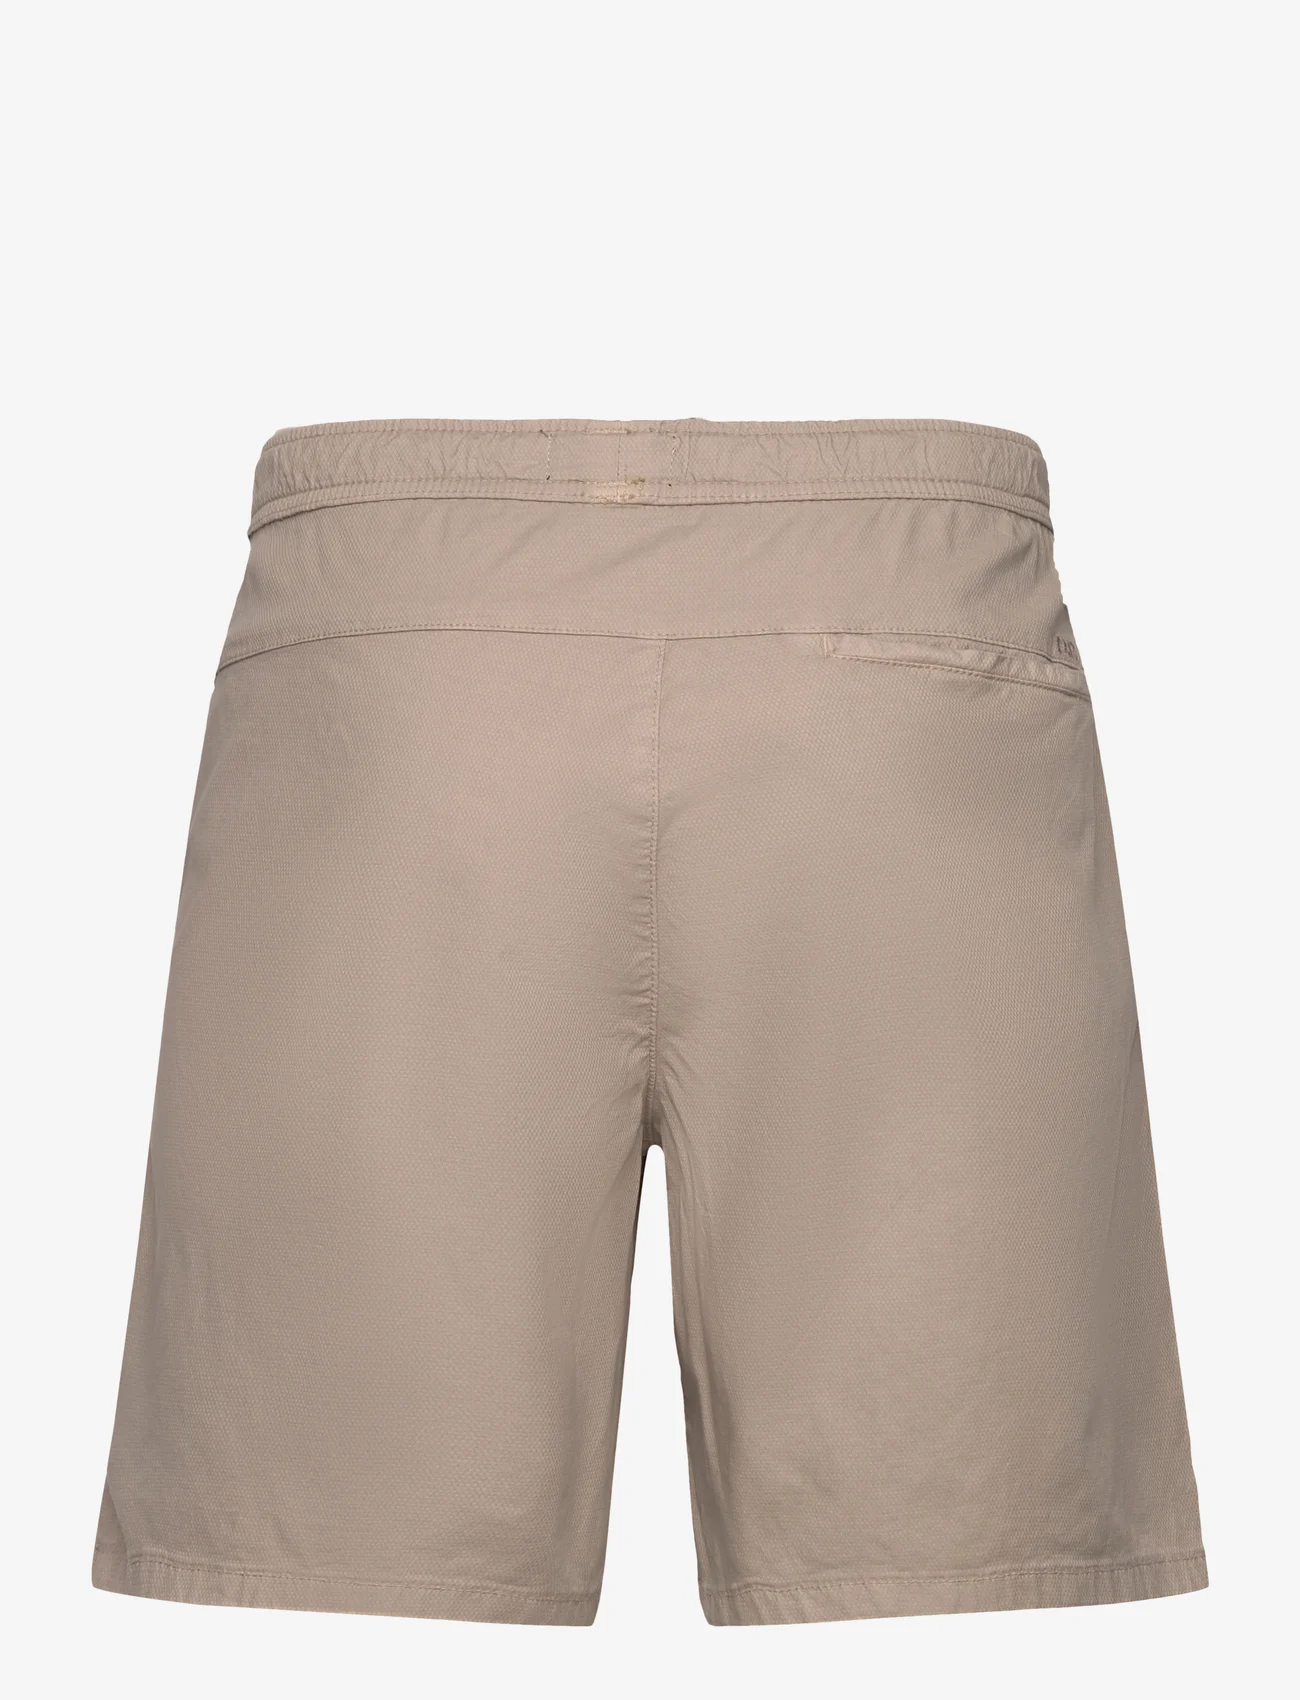 Denim project - DPTAPERED DIAMOND SHORTS - lowest prices - roasted cashew - 1